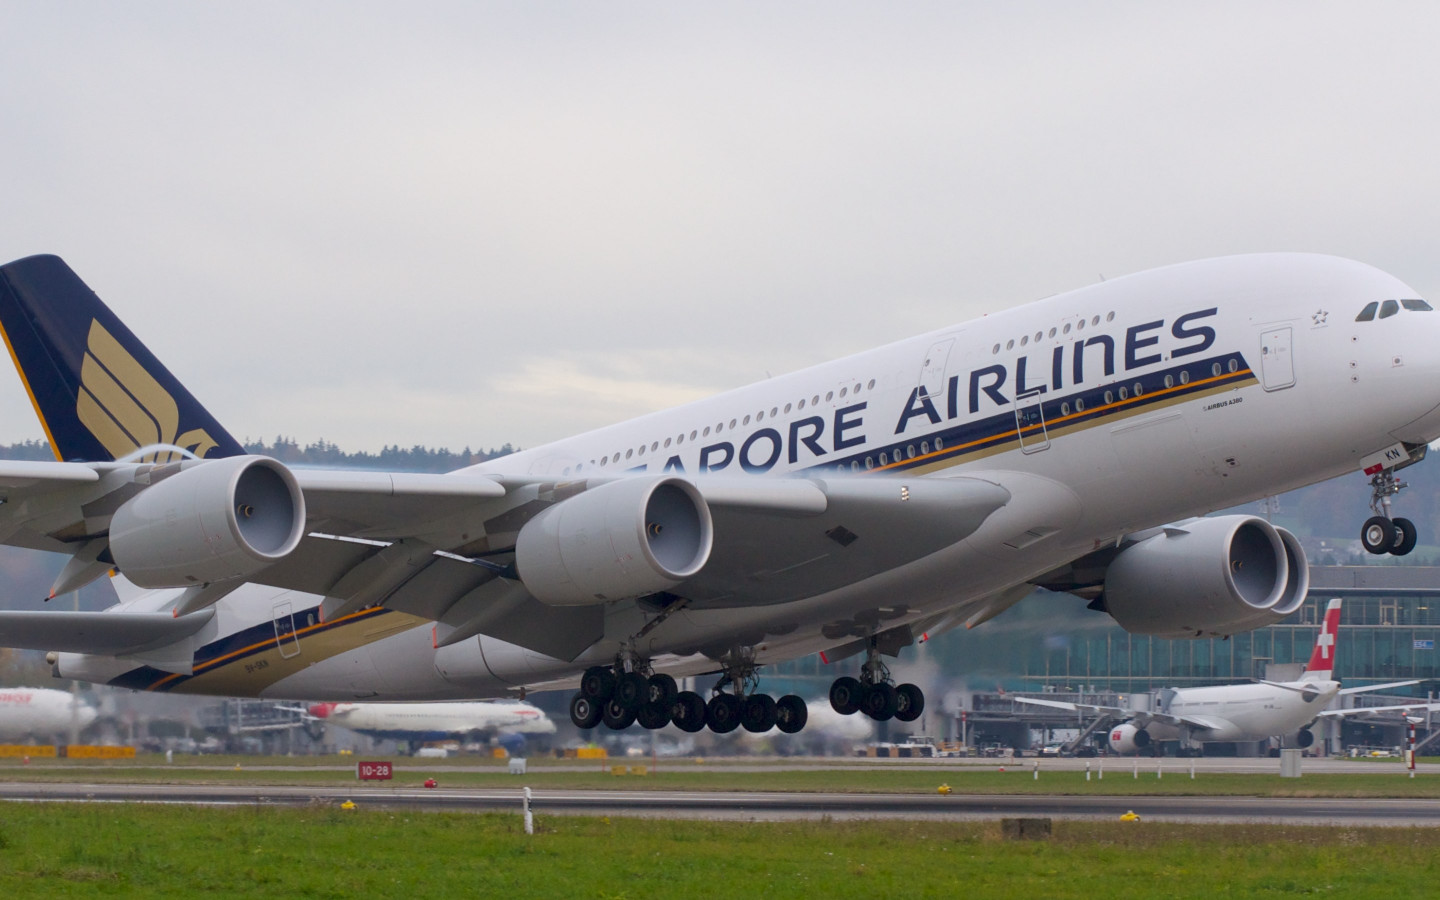 Passenger airplane from Singapore airlines wallpaper 1440x900